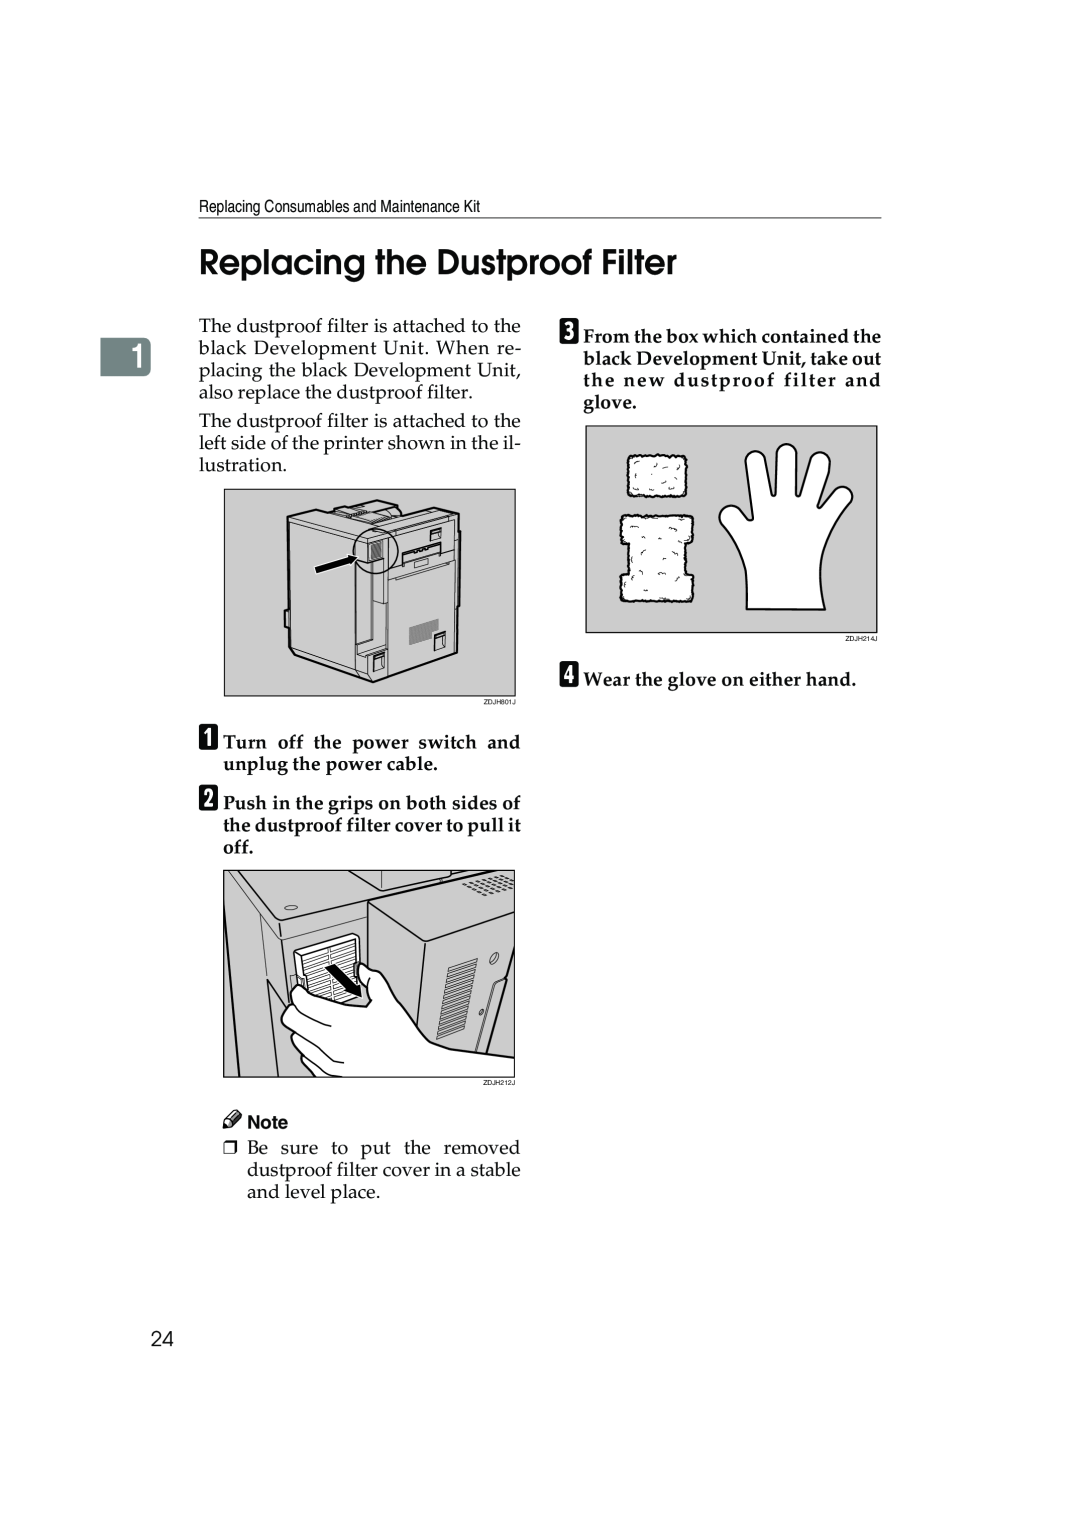 Ricoh AP3800C operating instructions Replacing the Dustproof Filter 